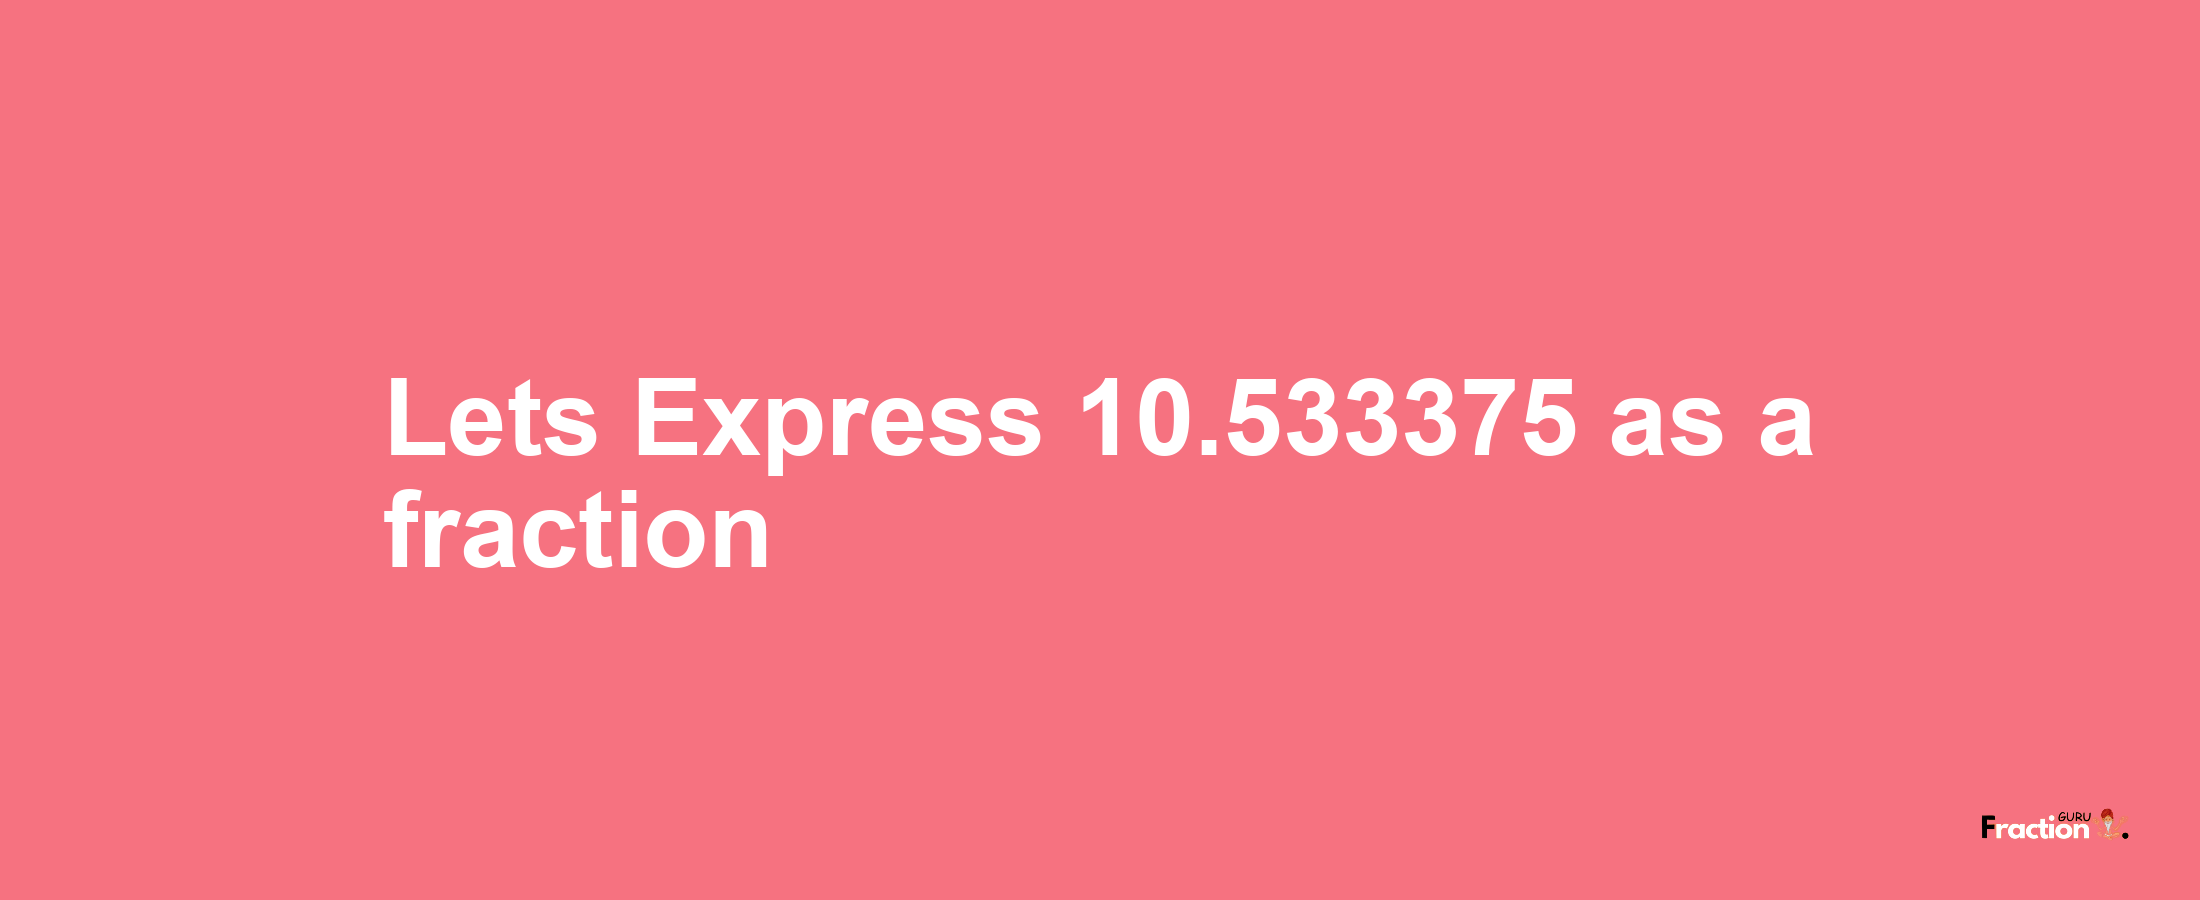 Lets Express 10.533375 as afraction